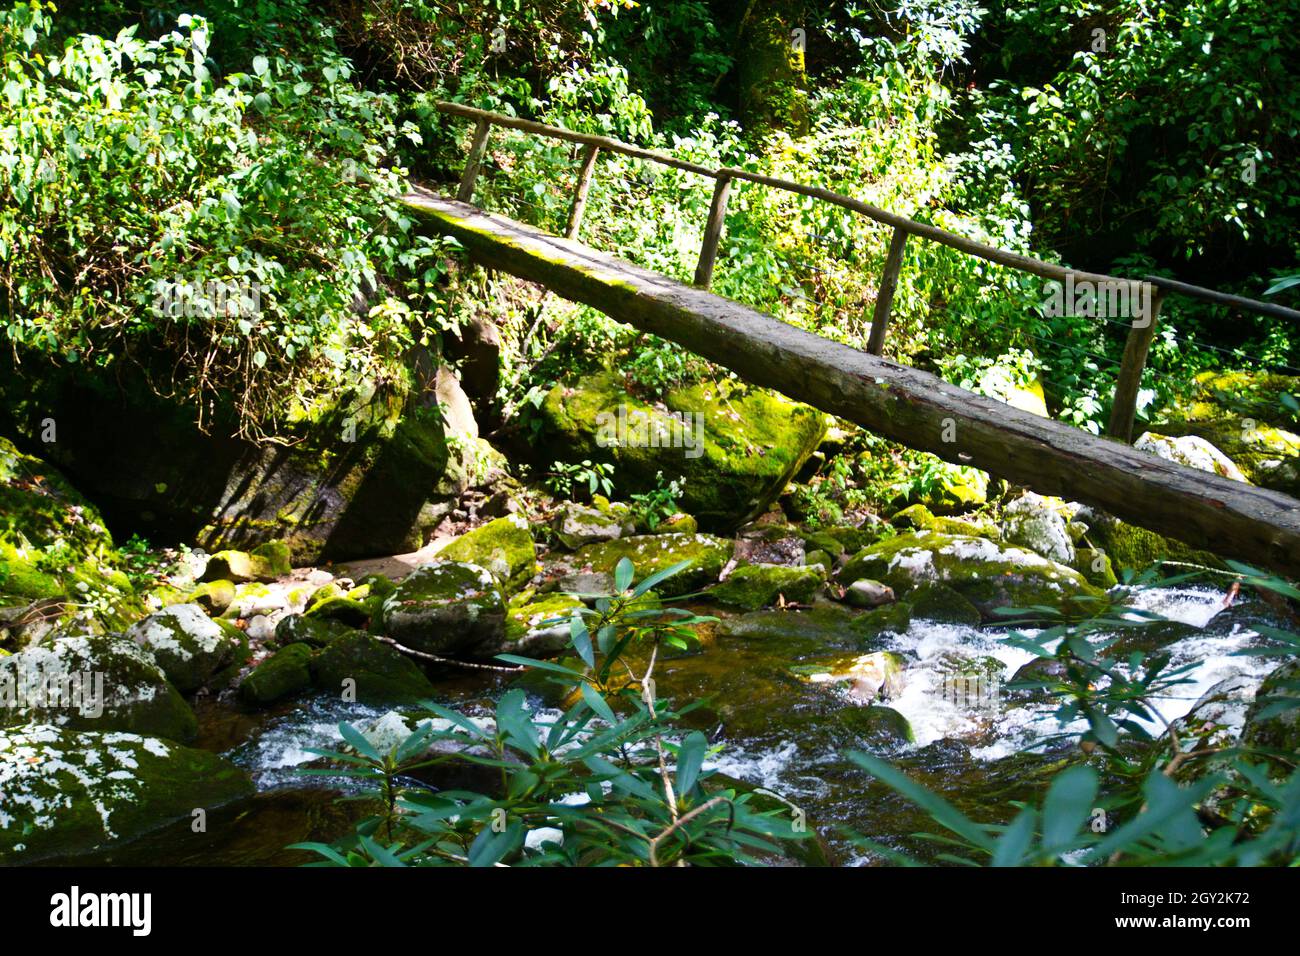 Water flows underneath a narrow wooden bridge with trees and greenery on either side Stock Photo